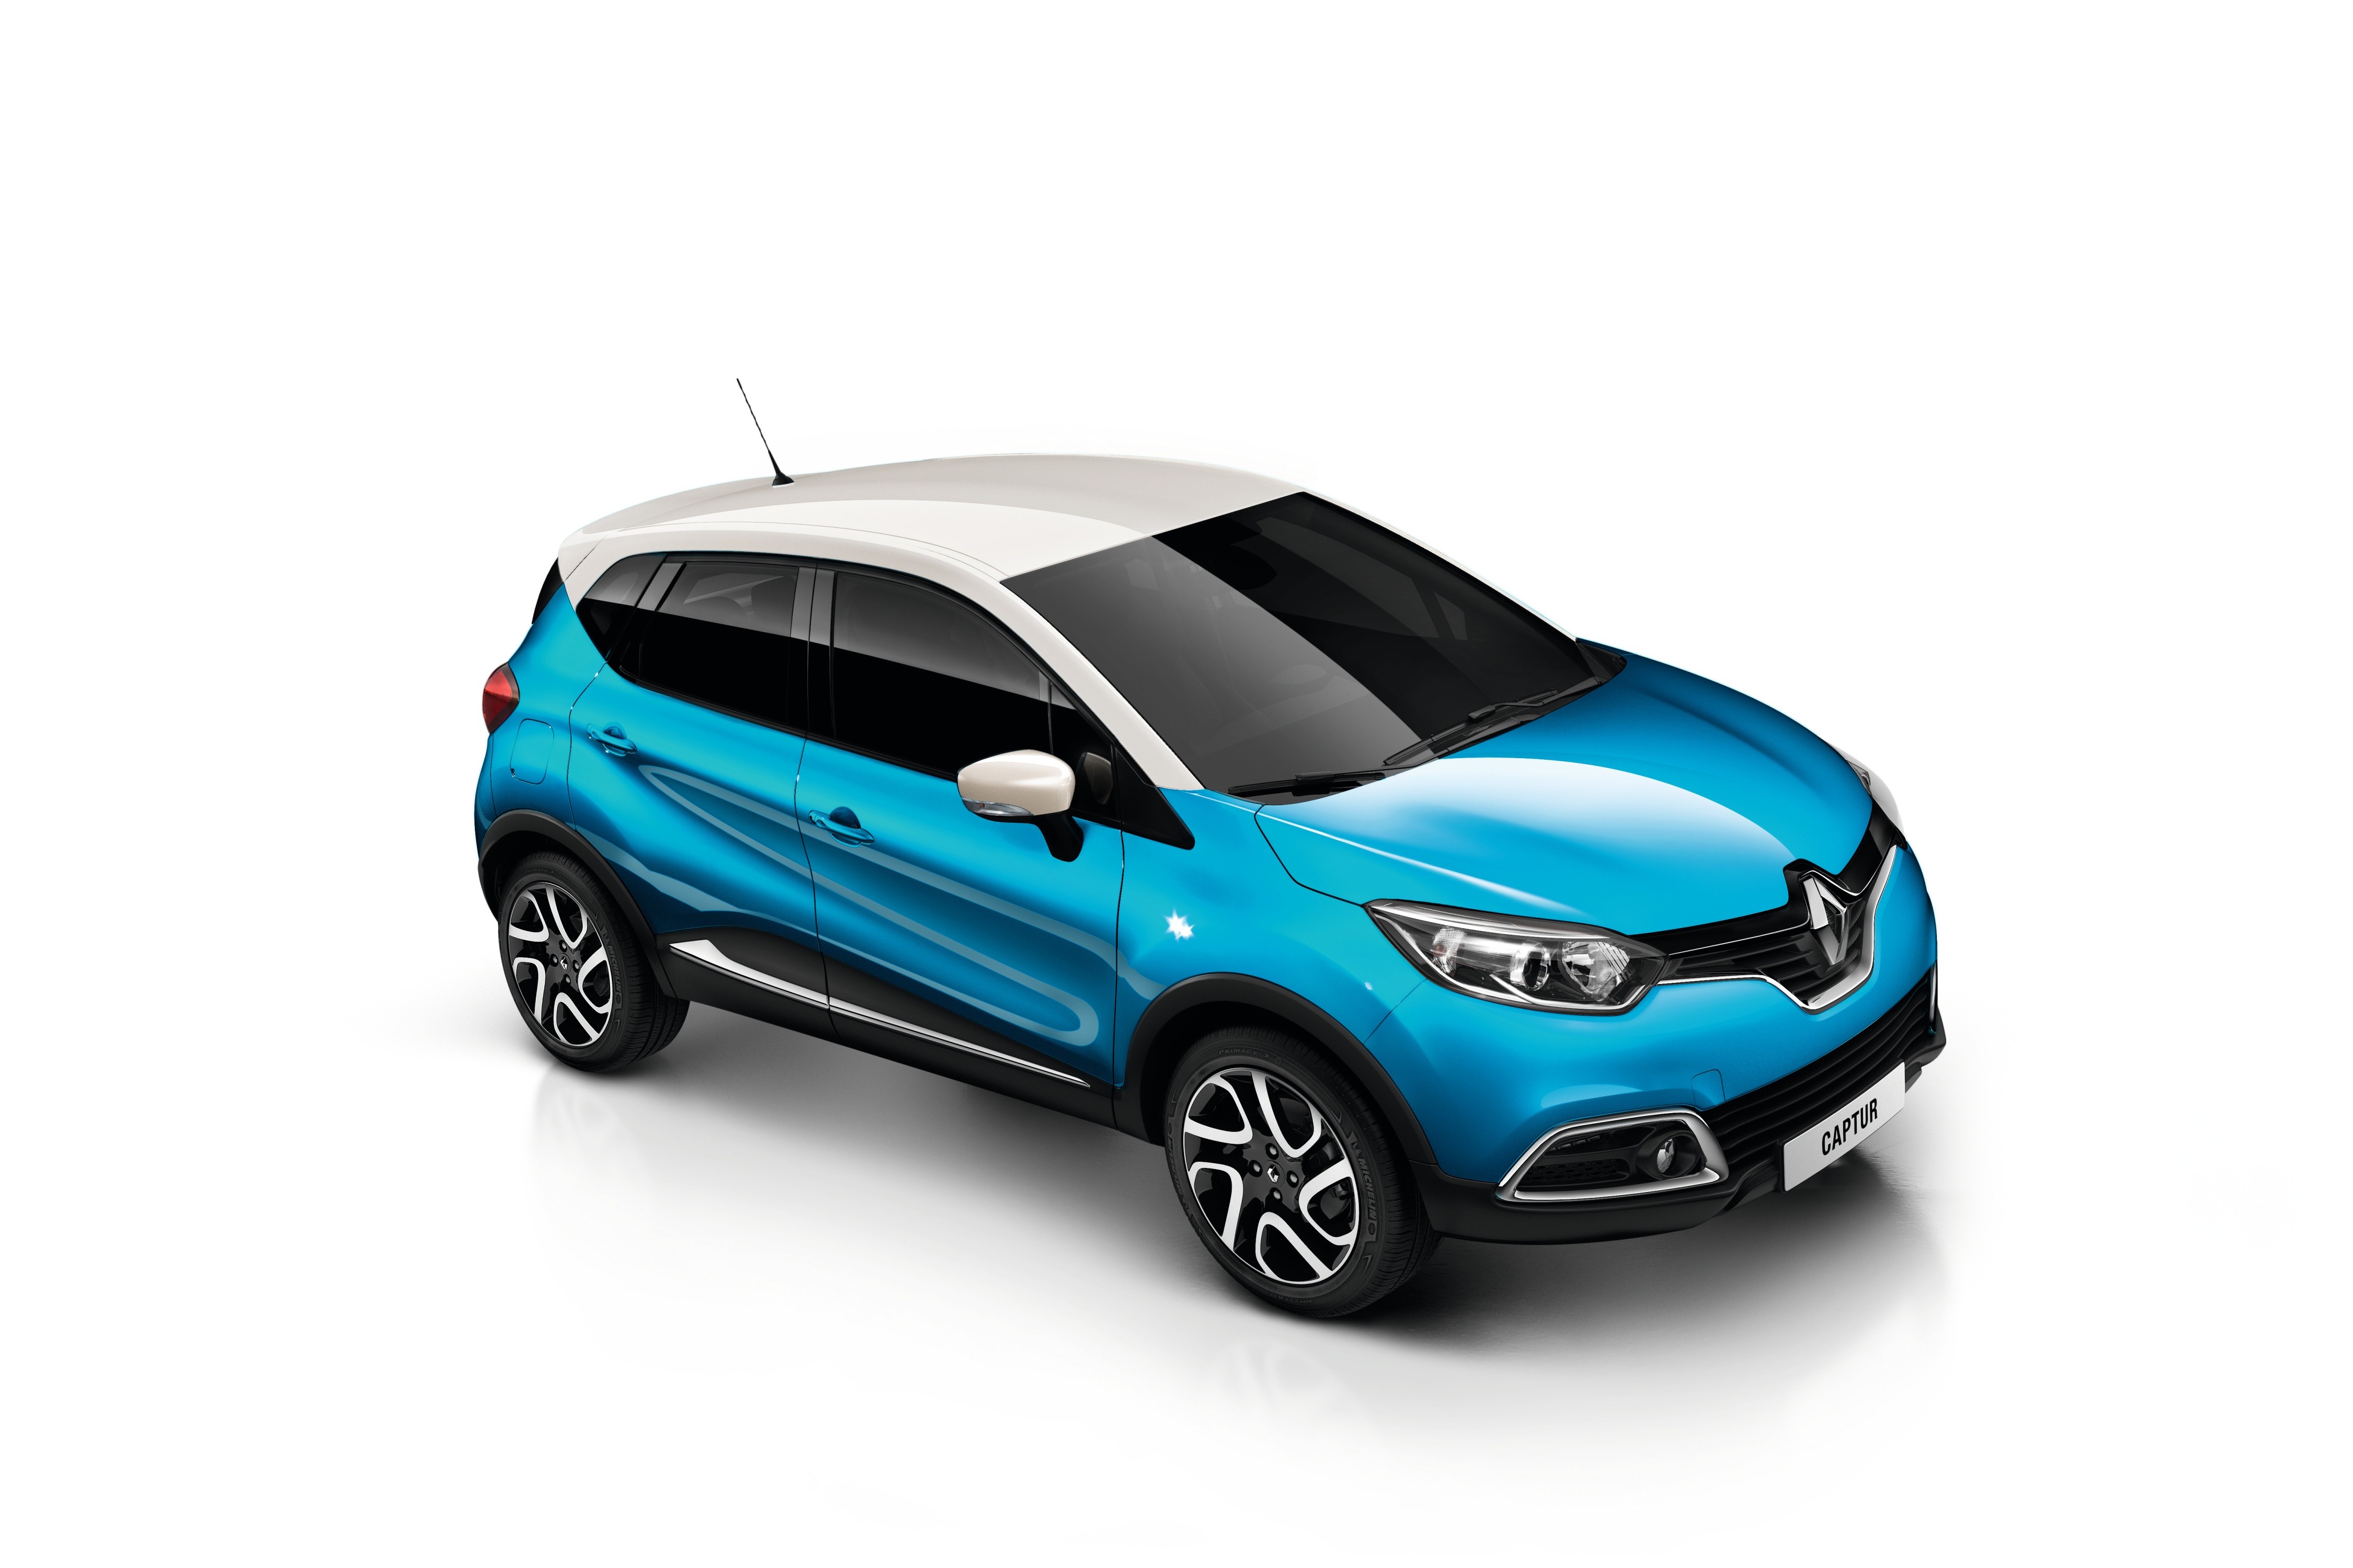 The Renault Captur Preview - A new Urban Crossover in Malaysia - kensomuse